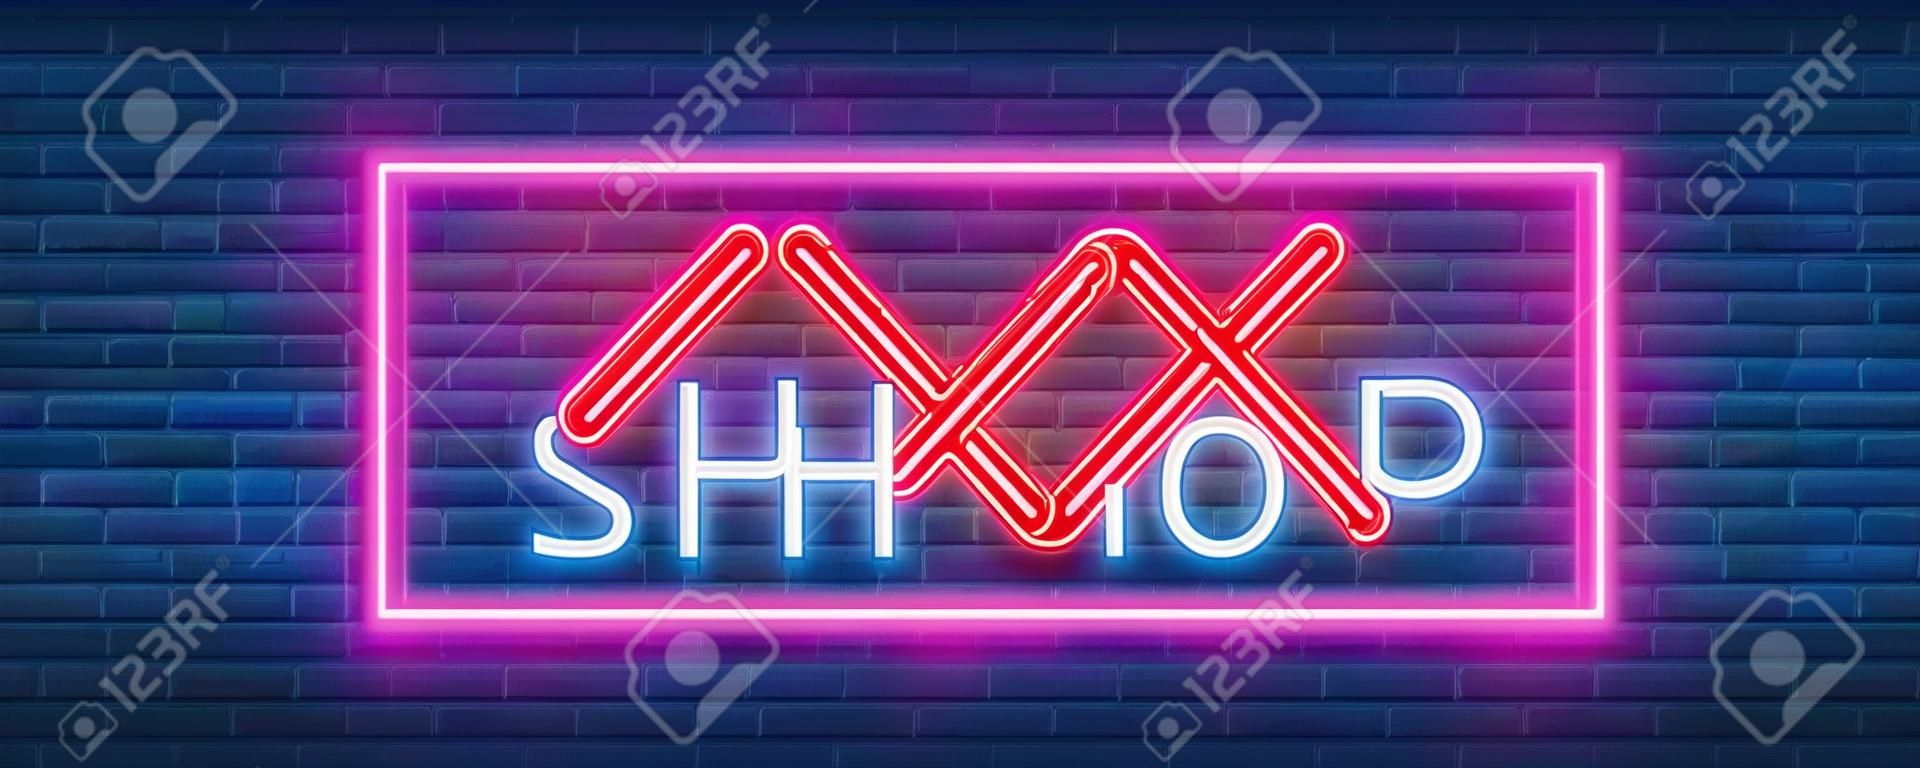 Adult shop logo, night sign in neon style. Neon sign, a symbol for  adult shop promotion. Adult Store. Bright banner, nightly advertising. Vector Illustration. Editing text neon sign. Neon alphabet